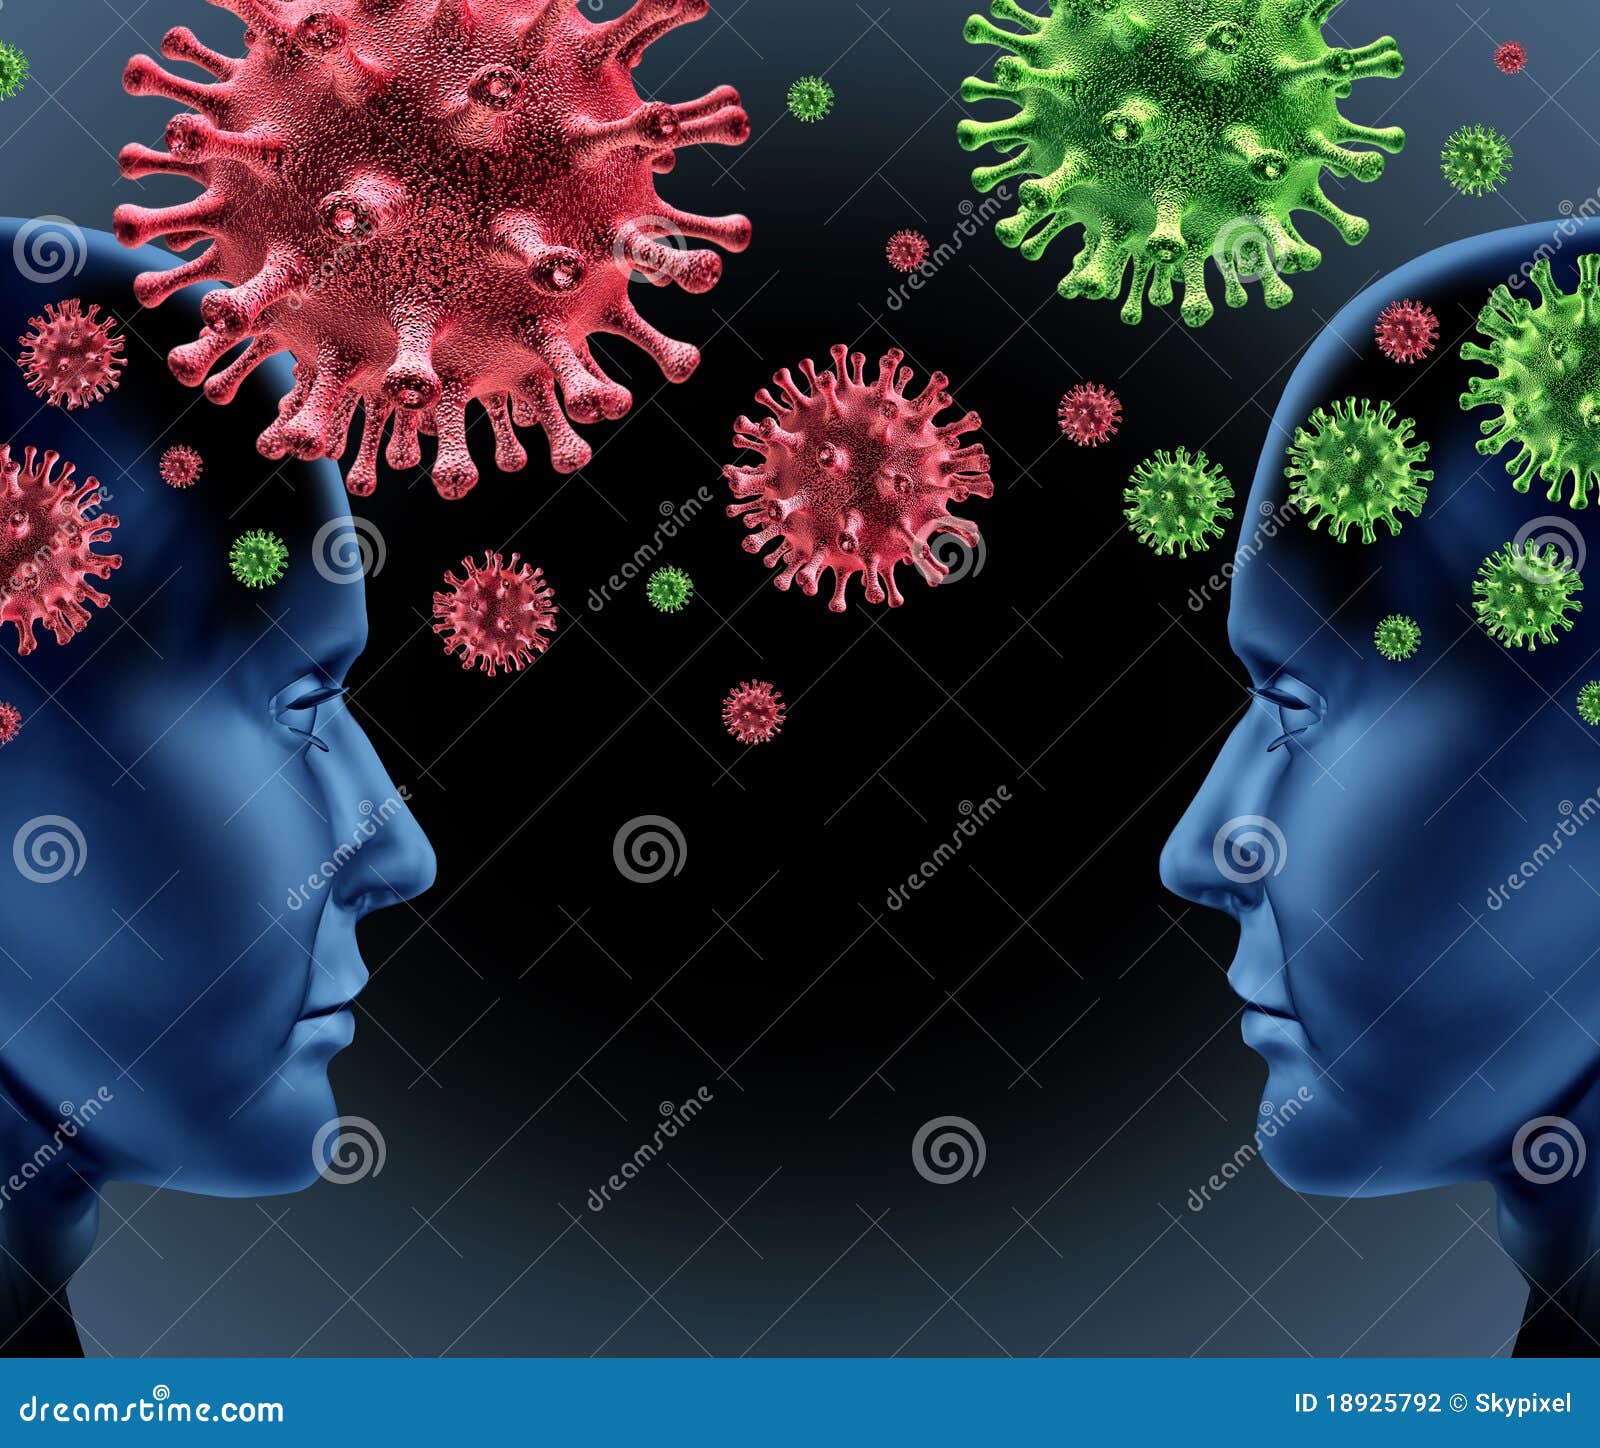 Contagious Disease Stock Photography - Image: 18925792